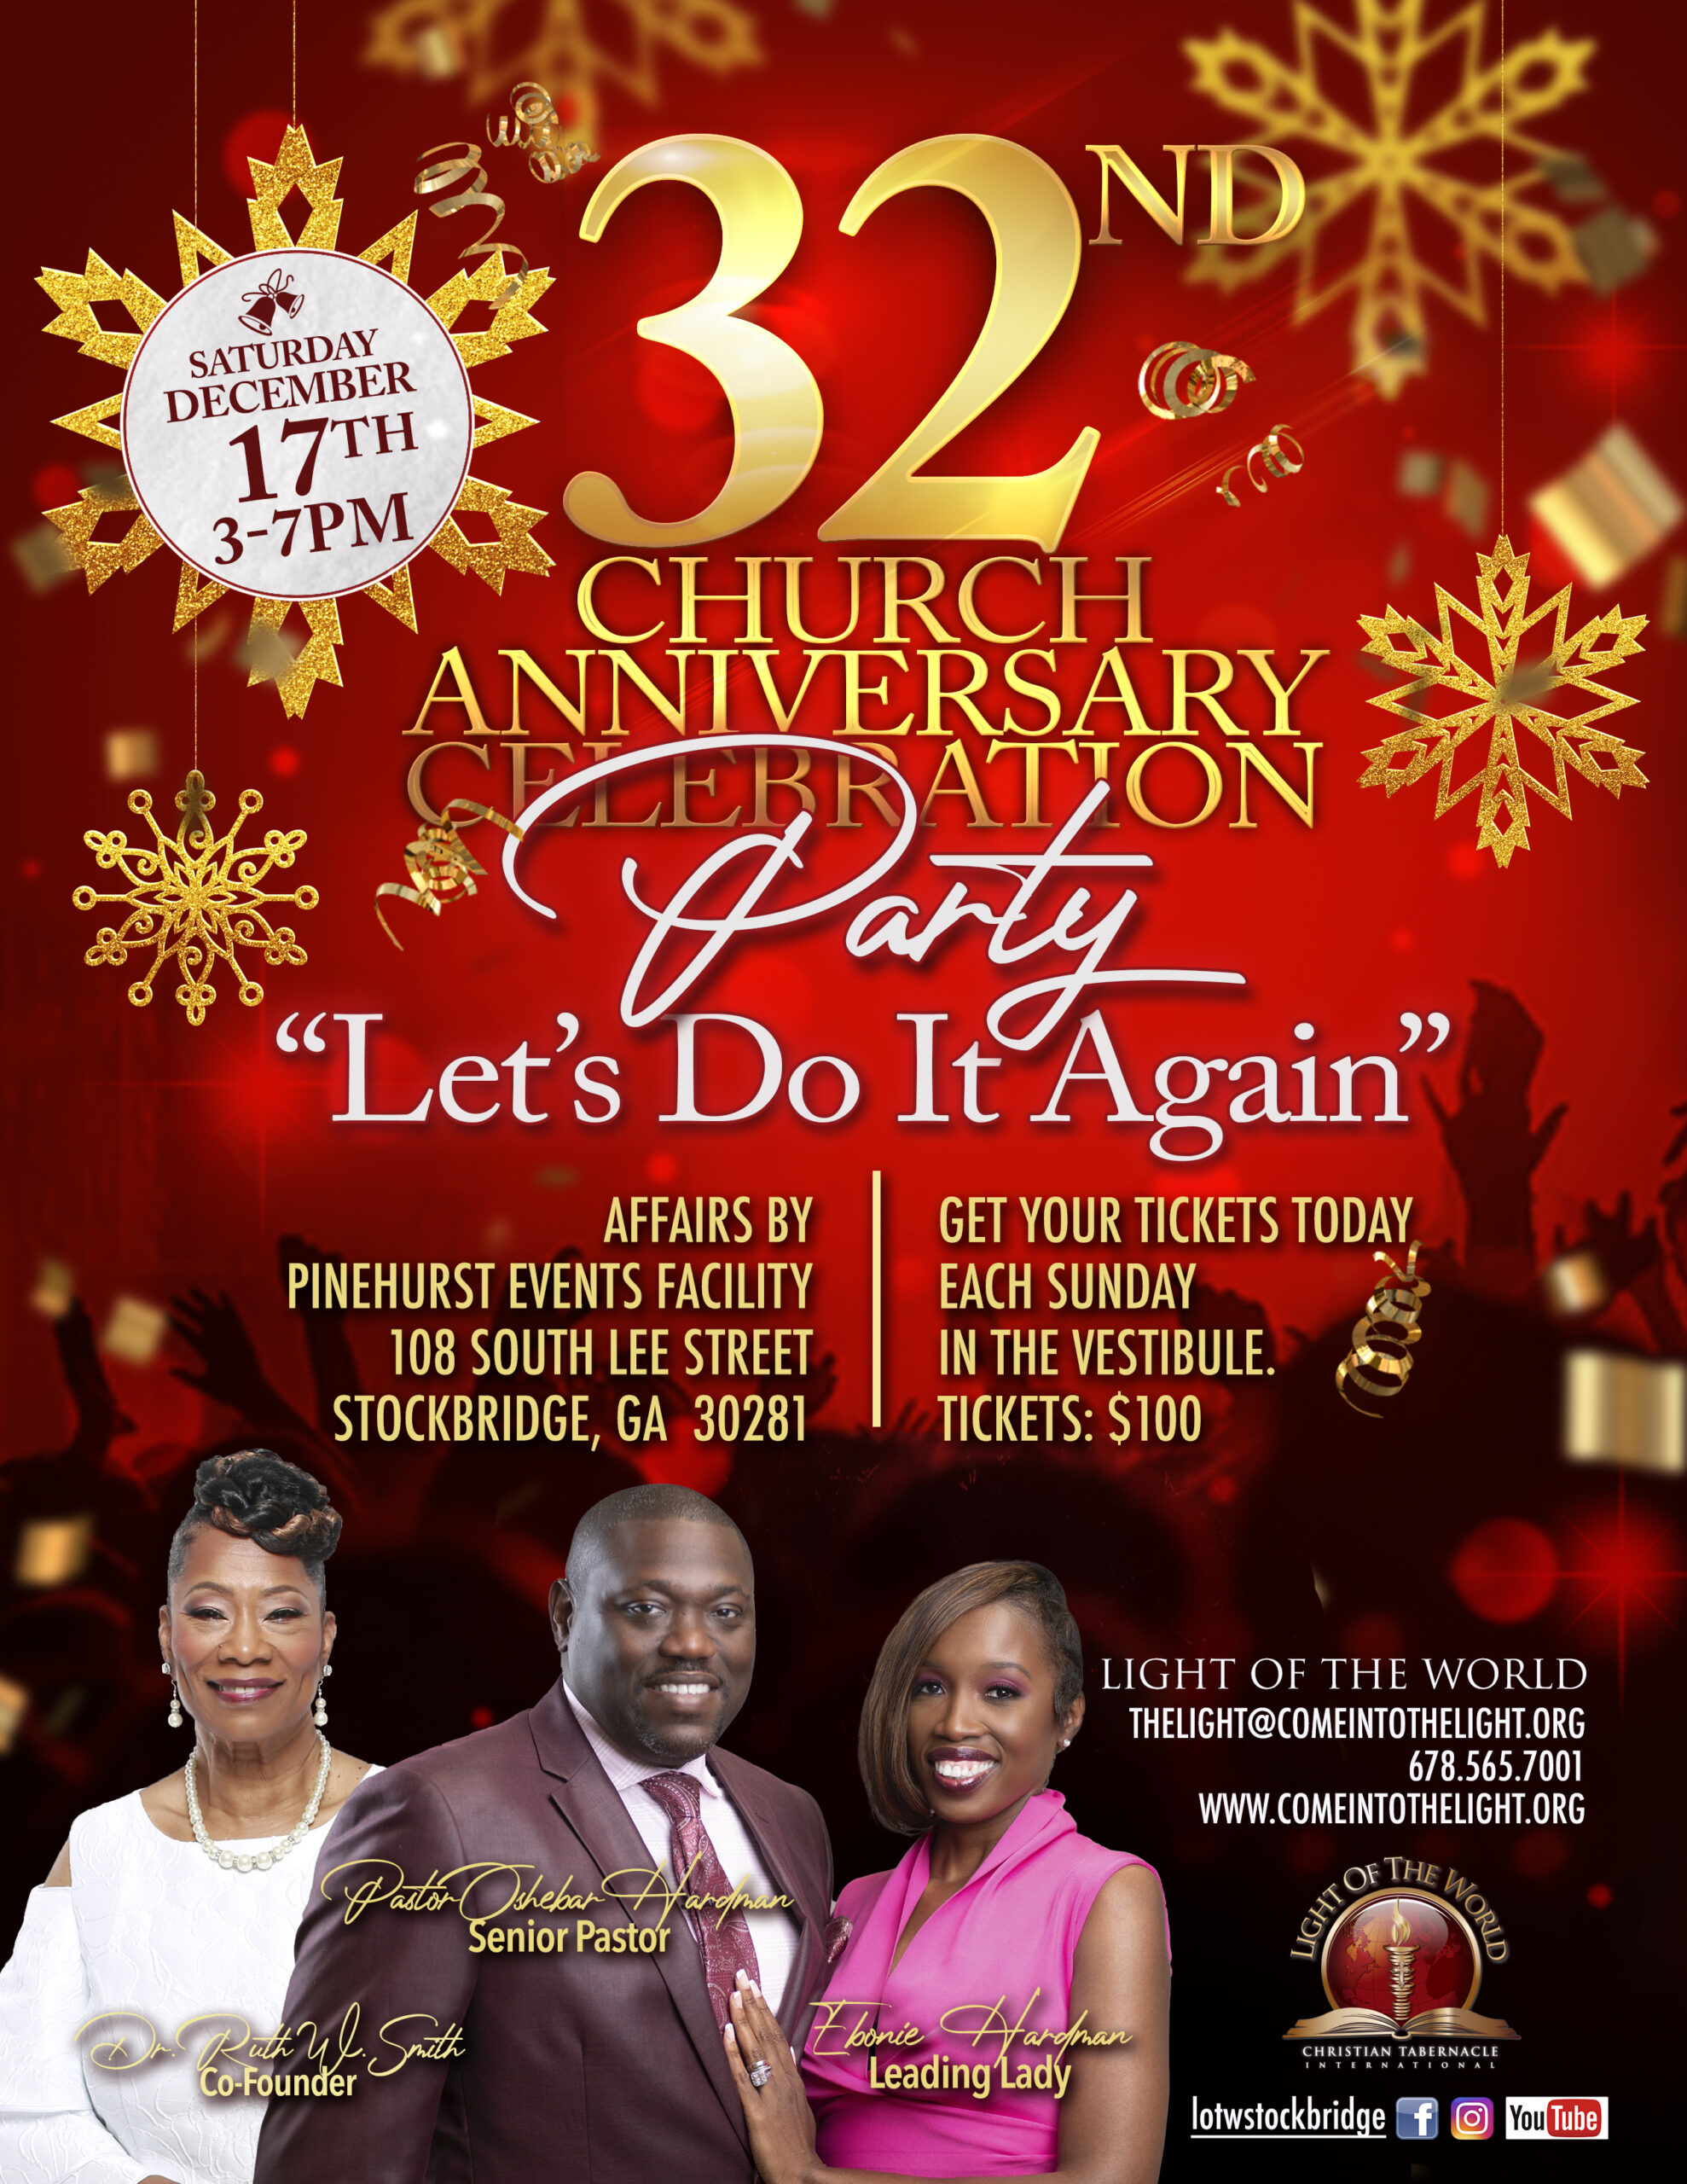 32nd Church Anniversary party flyer with red background and gold snowflakes